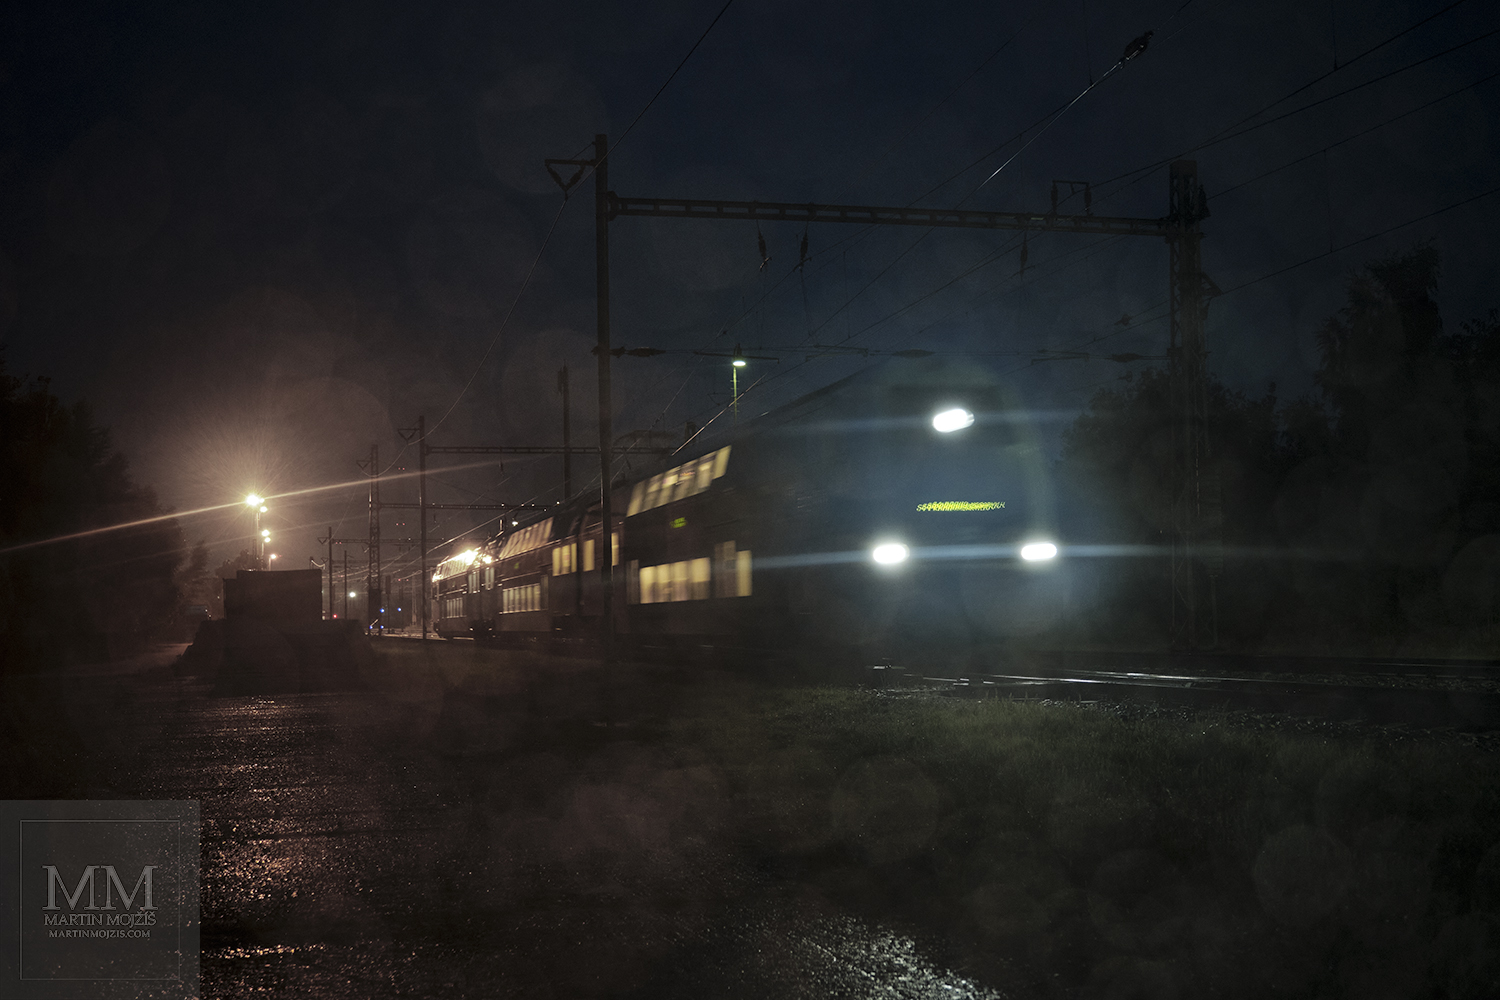 A train running on a rainy morning before dawn. Fine art photograph MORNING IN THE SILENCE OF THE RAIN, photographed by Martin Mojzis.